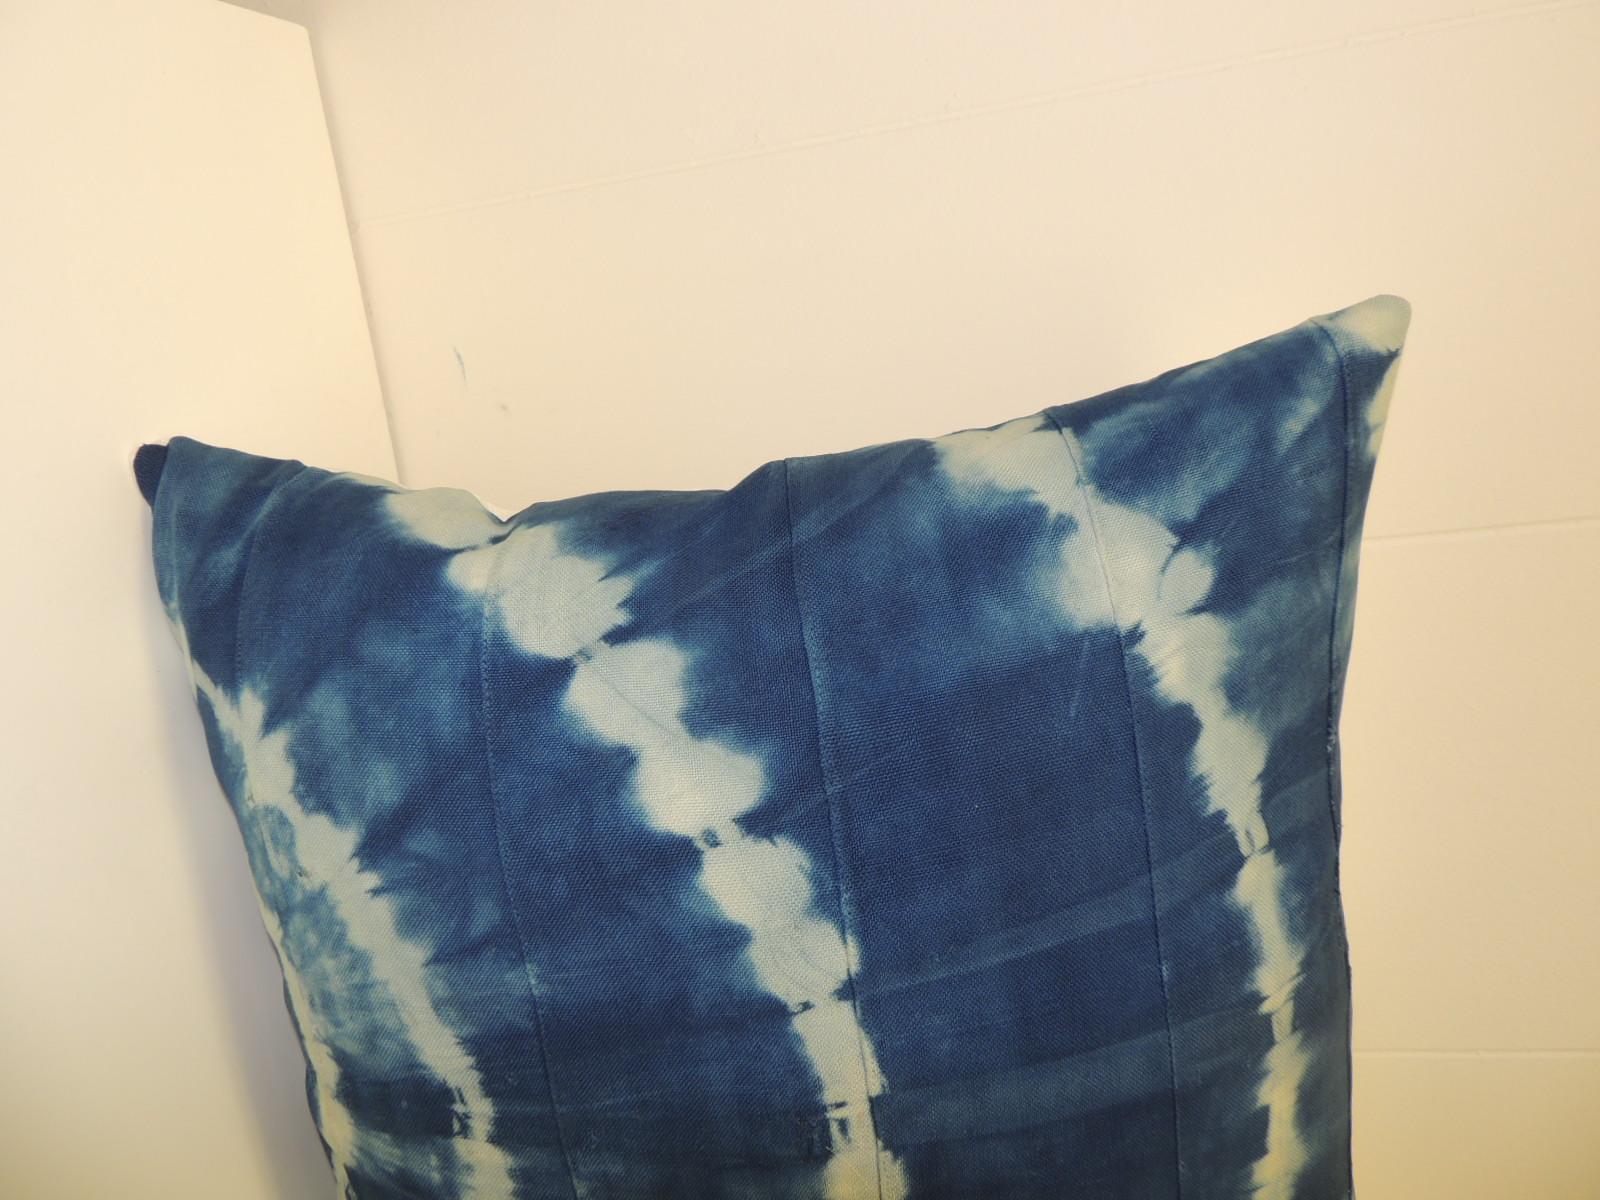 Vintage Indigo and White African Resist-dye Textile Decorative Pillow
Sunburst pattern square pillow with textured white silk backing.
Decorative pillow handmade and designed in the USA. 
Closure by stitch (no zipper) with custom made feather/down